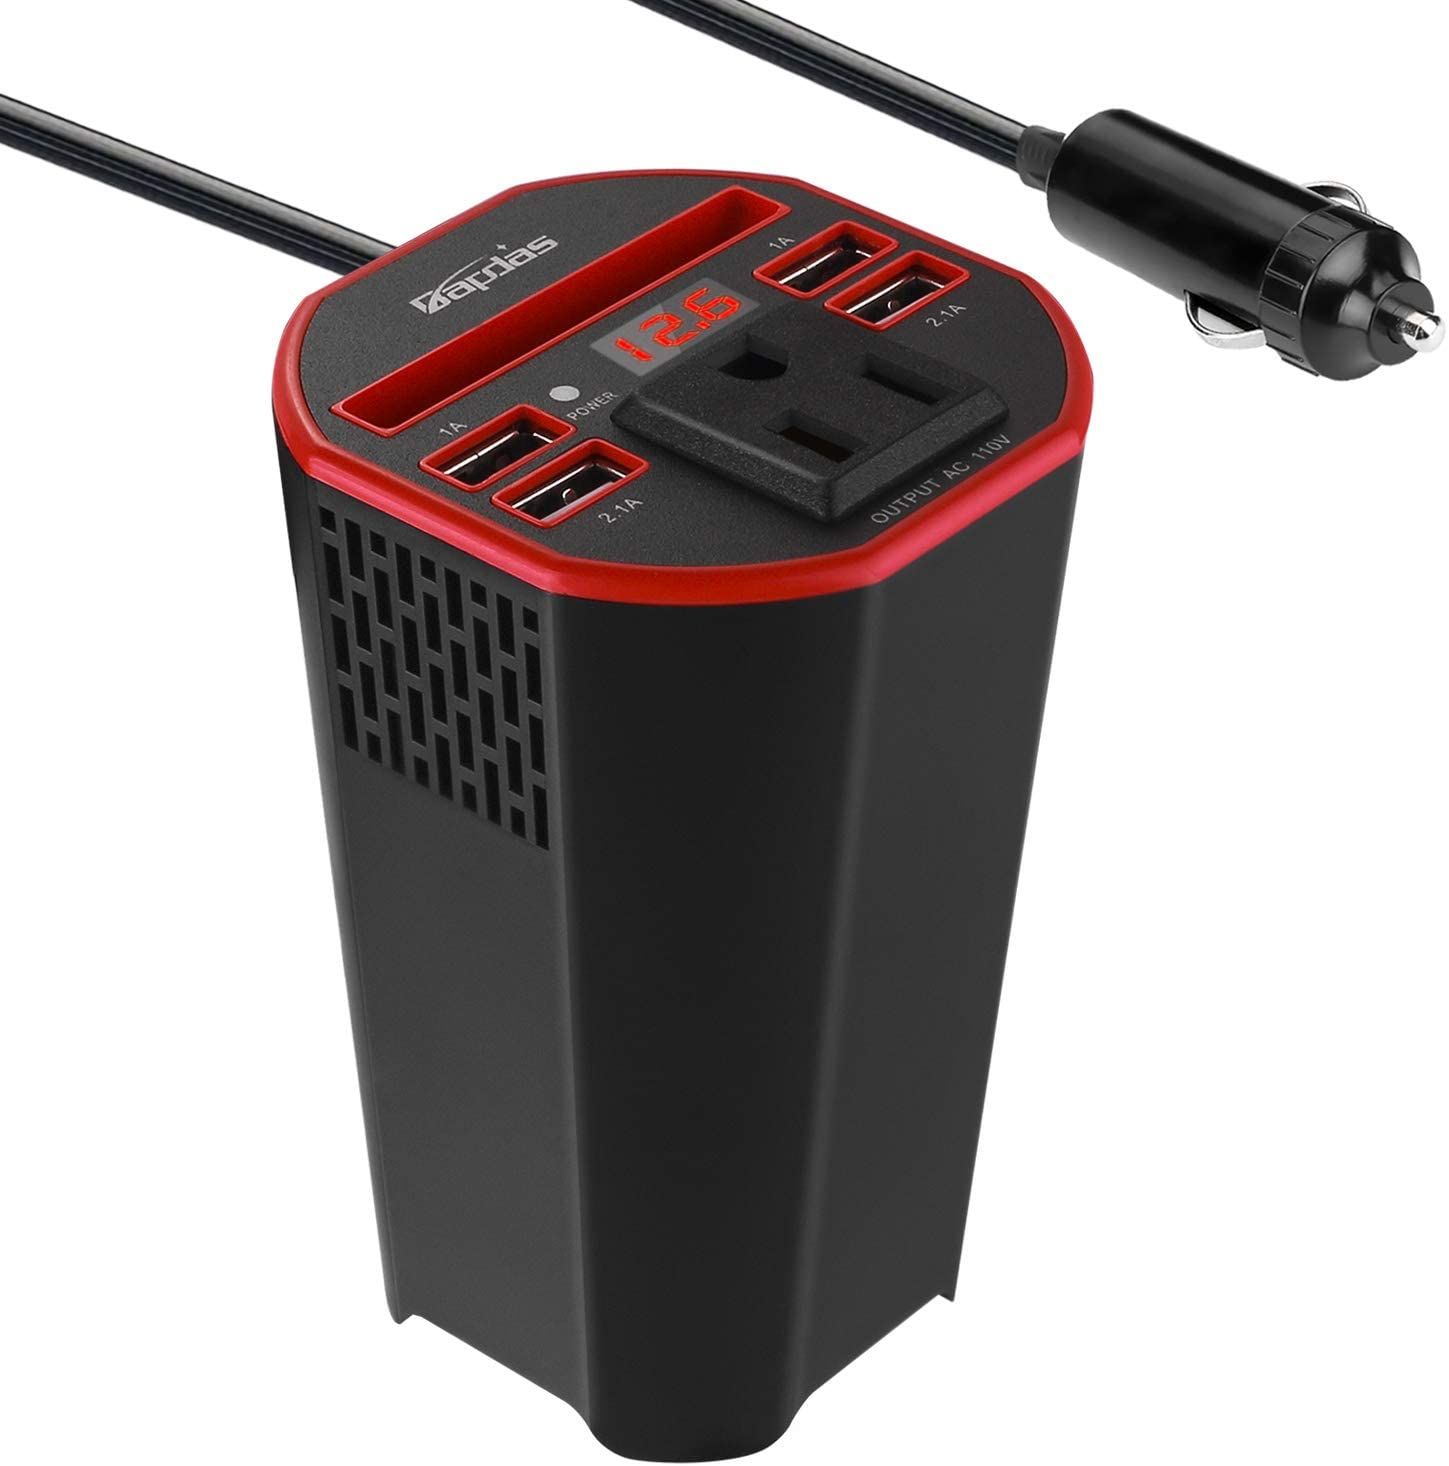 Bapdas 150W Car Cup Power Inverter DC 12V to 110V AC Converter with 1 AC Outlet and 4 USB Ports for Tablets, Laptops and Smartphones-Red